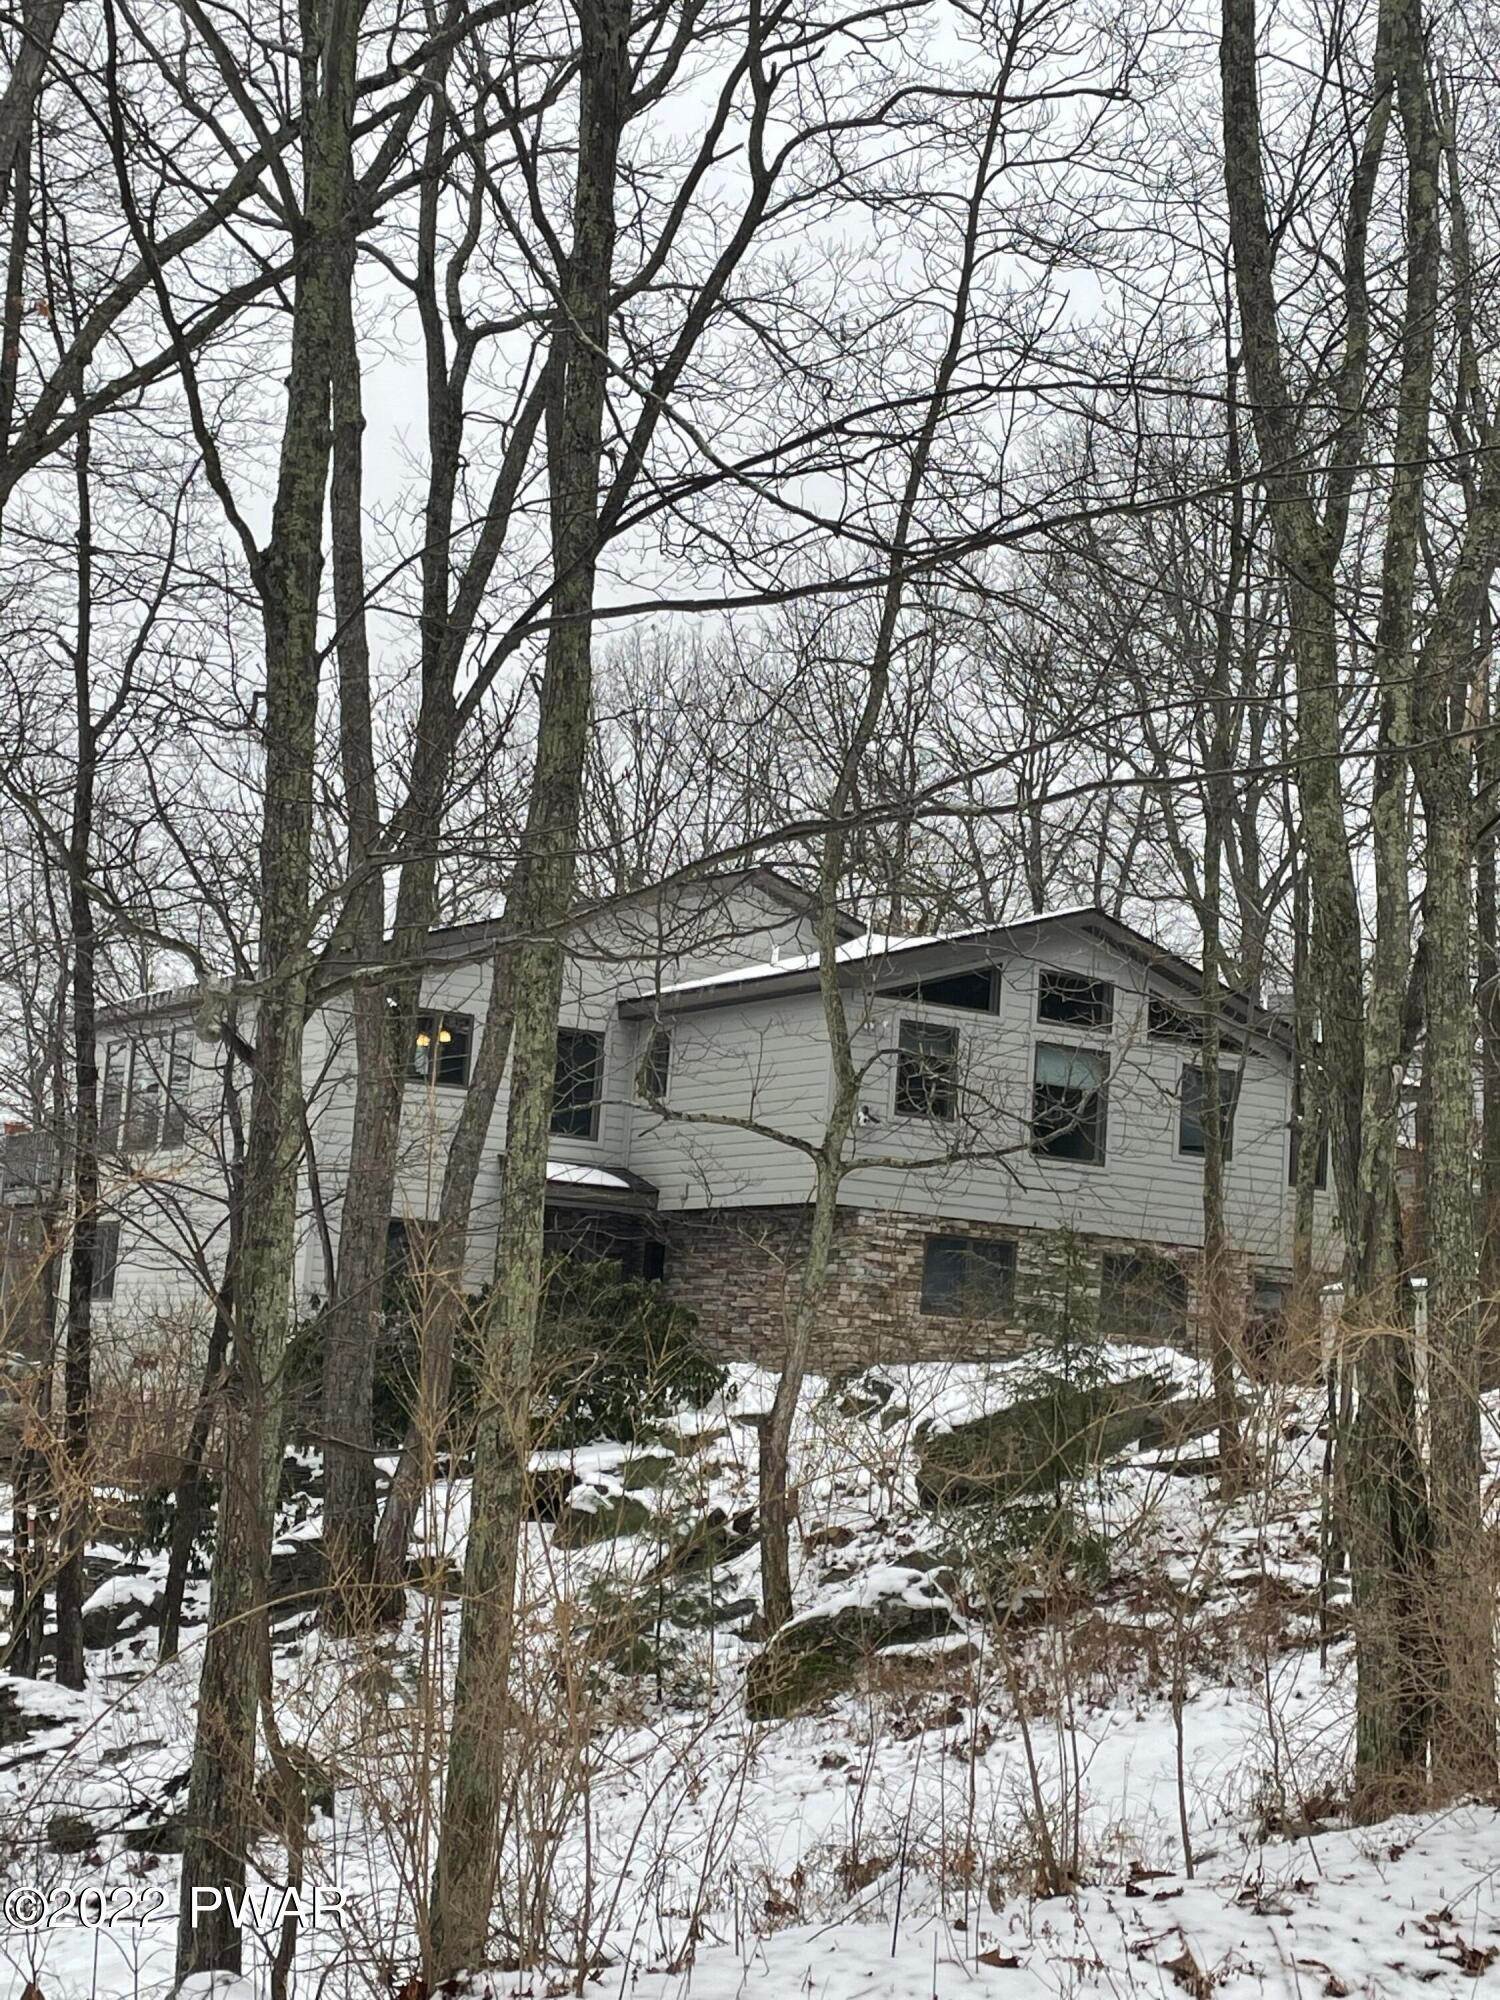 Property for Sale at 226 Remuda Drive Lords Valley, Pennsylvania 18428 United States